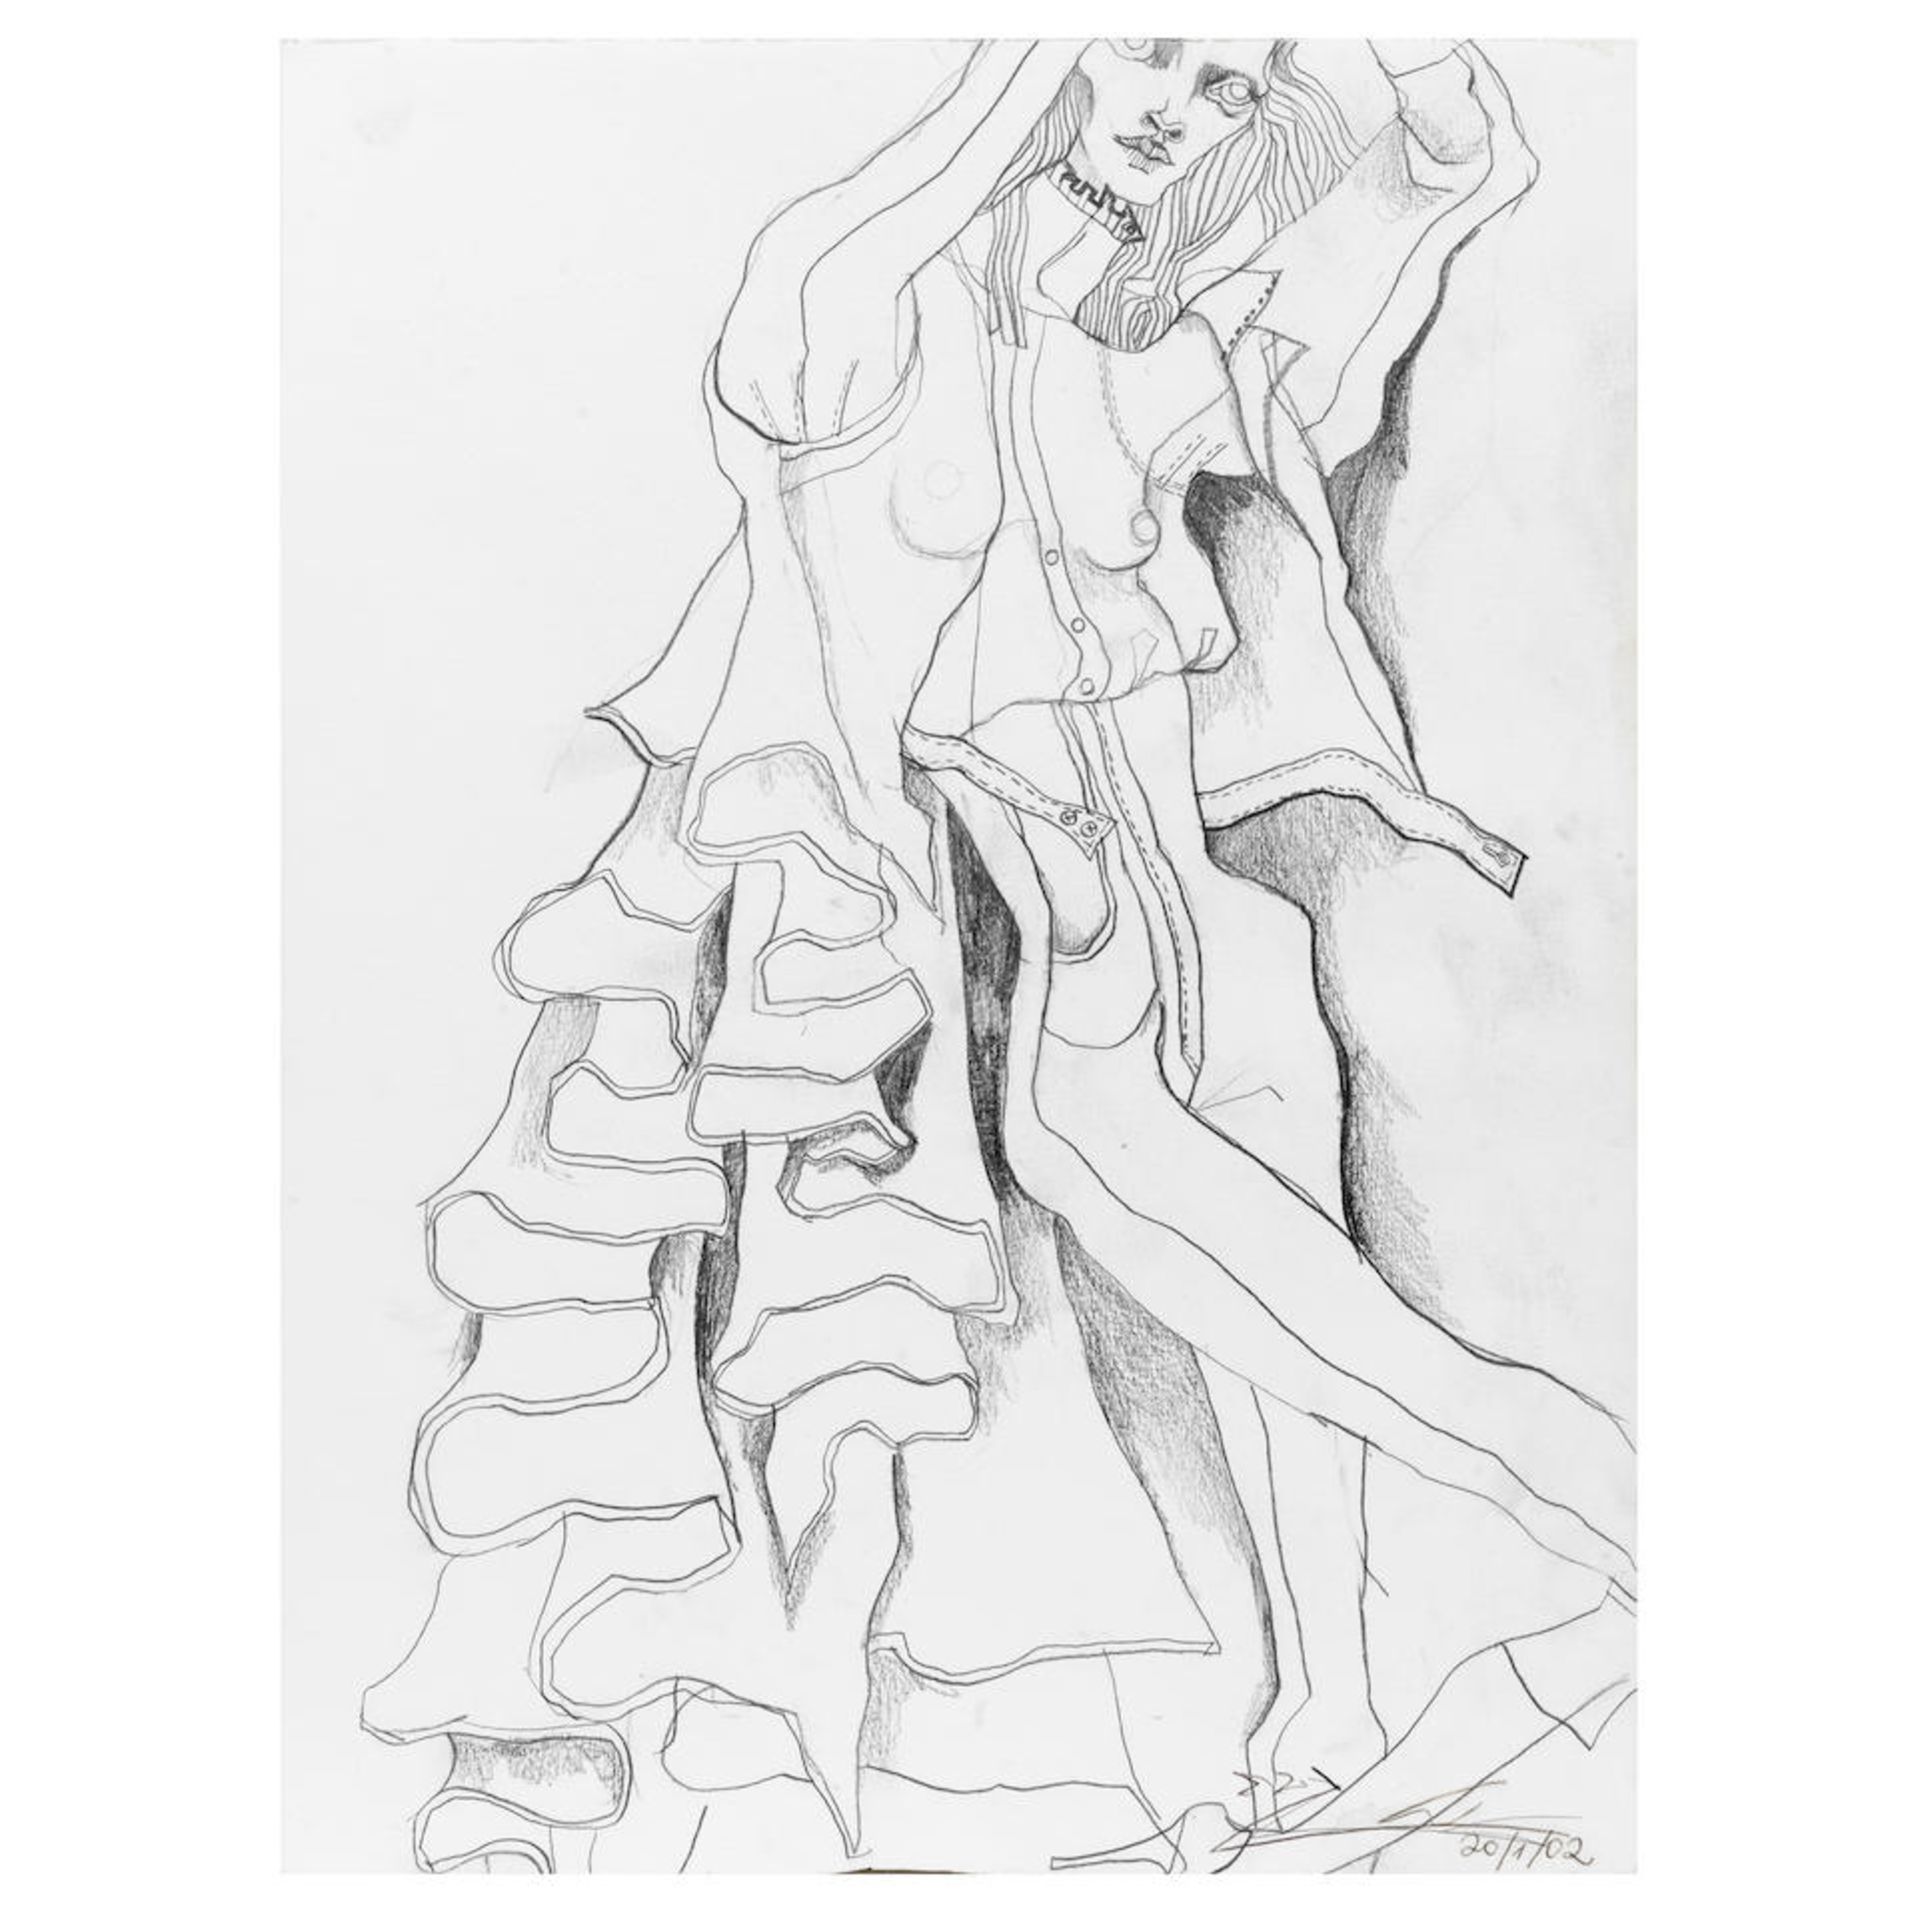 Attributed to John Galliano: a Pencil Drawing on Paper Dated 20/01/02